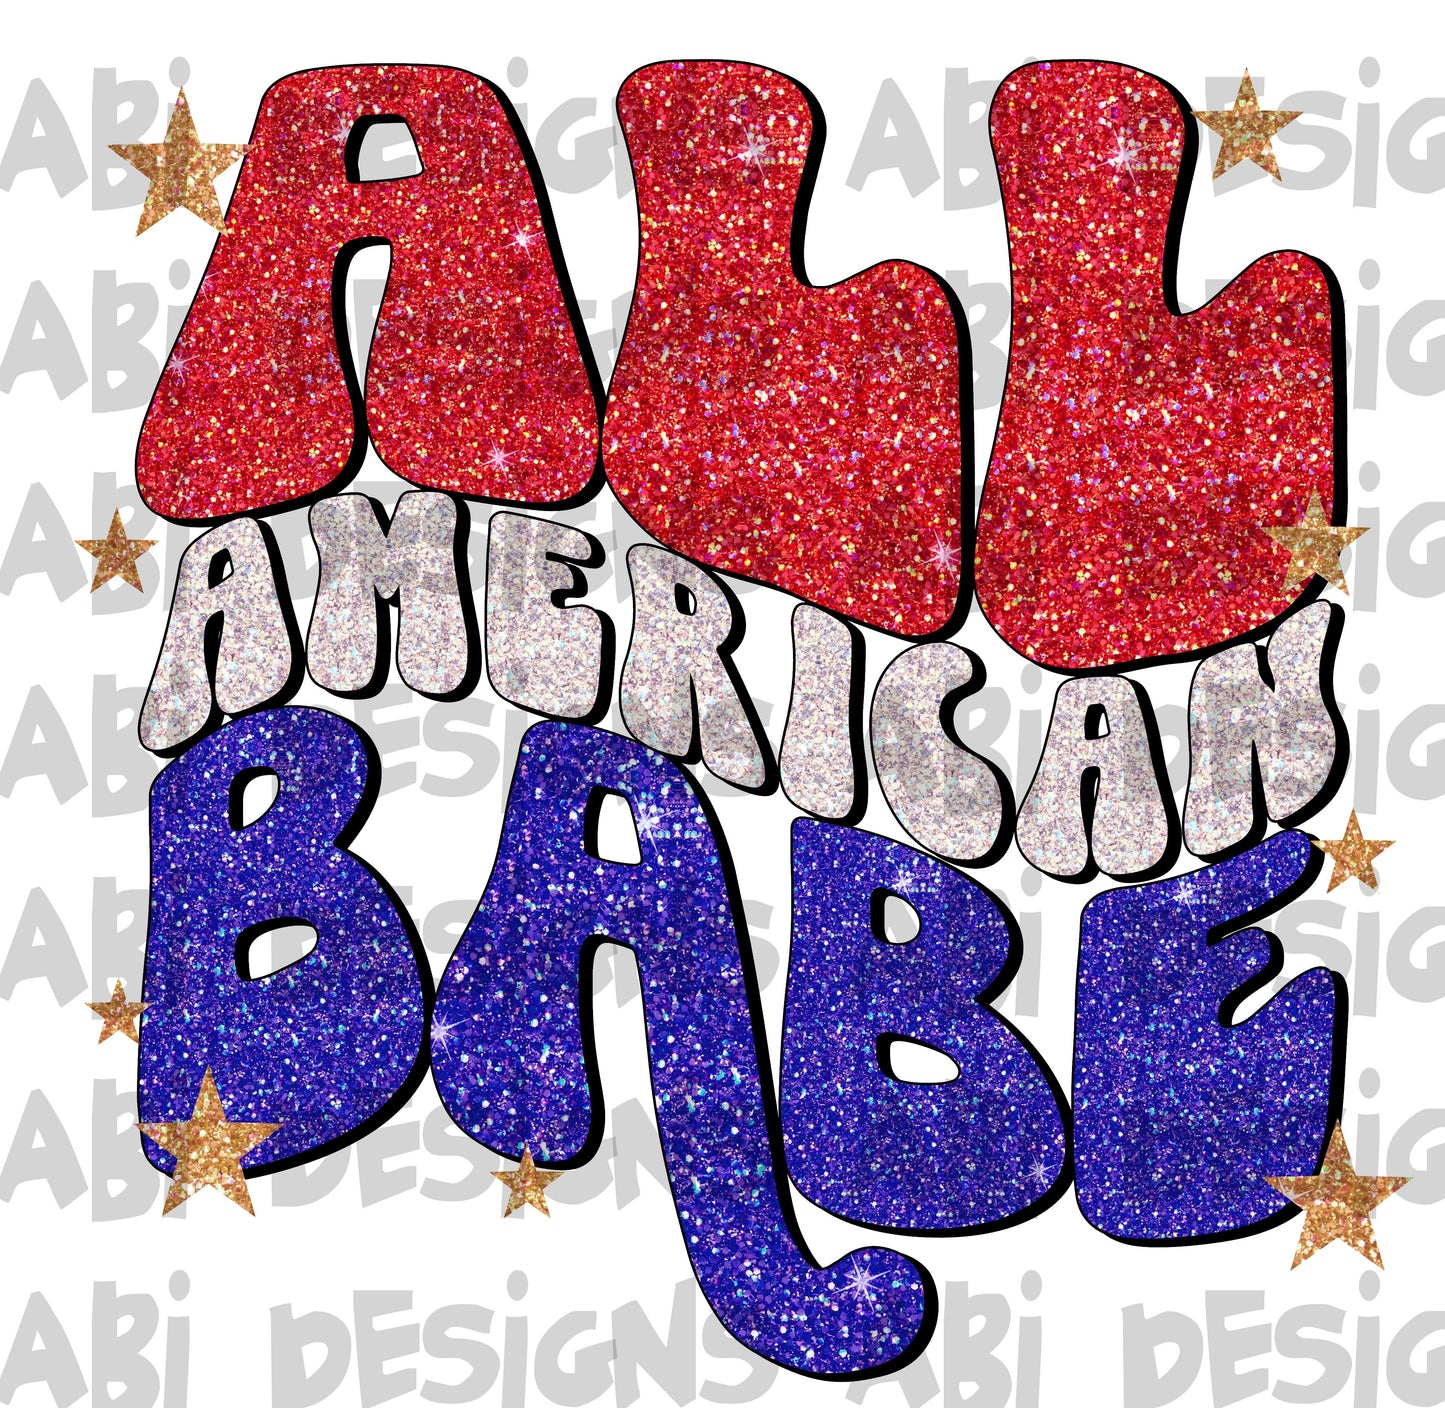 All American babe - DTF